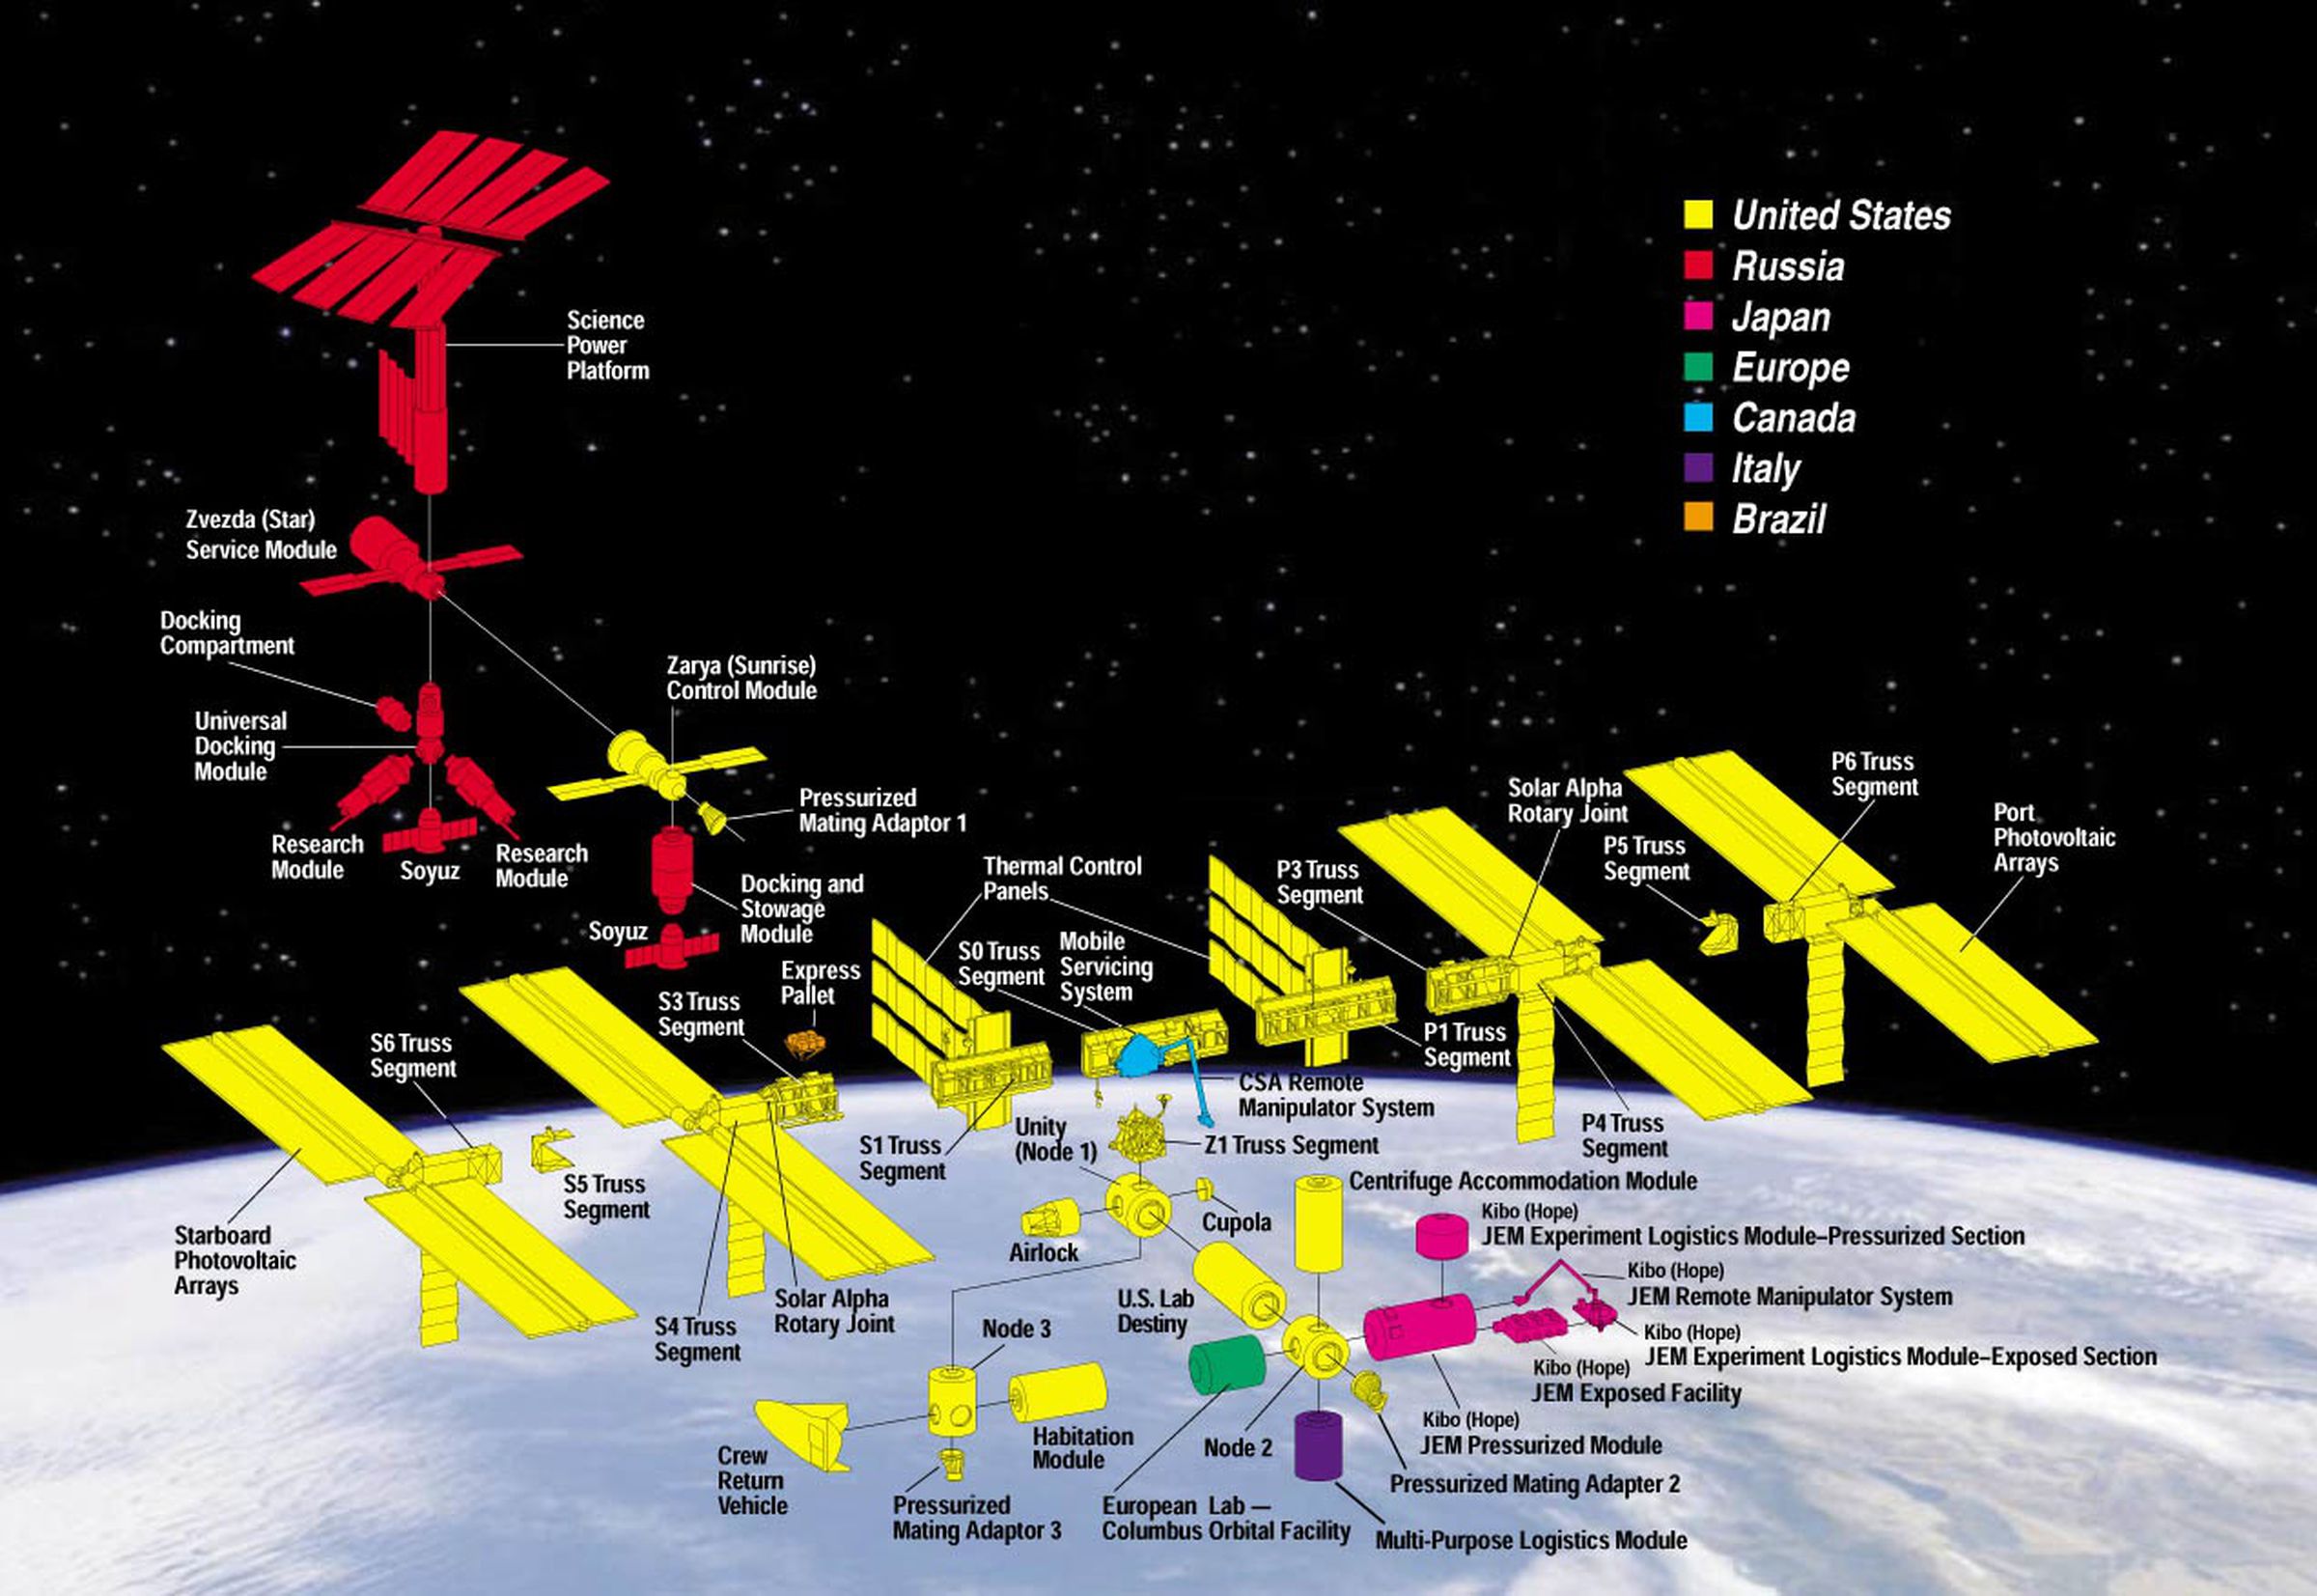 A graphic showing proposed contributions to the International Space Station.